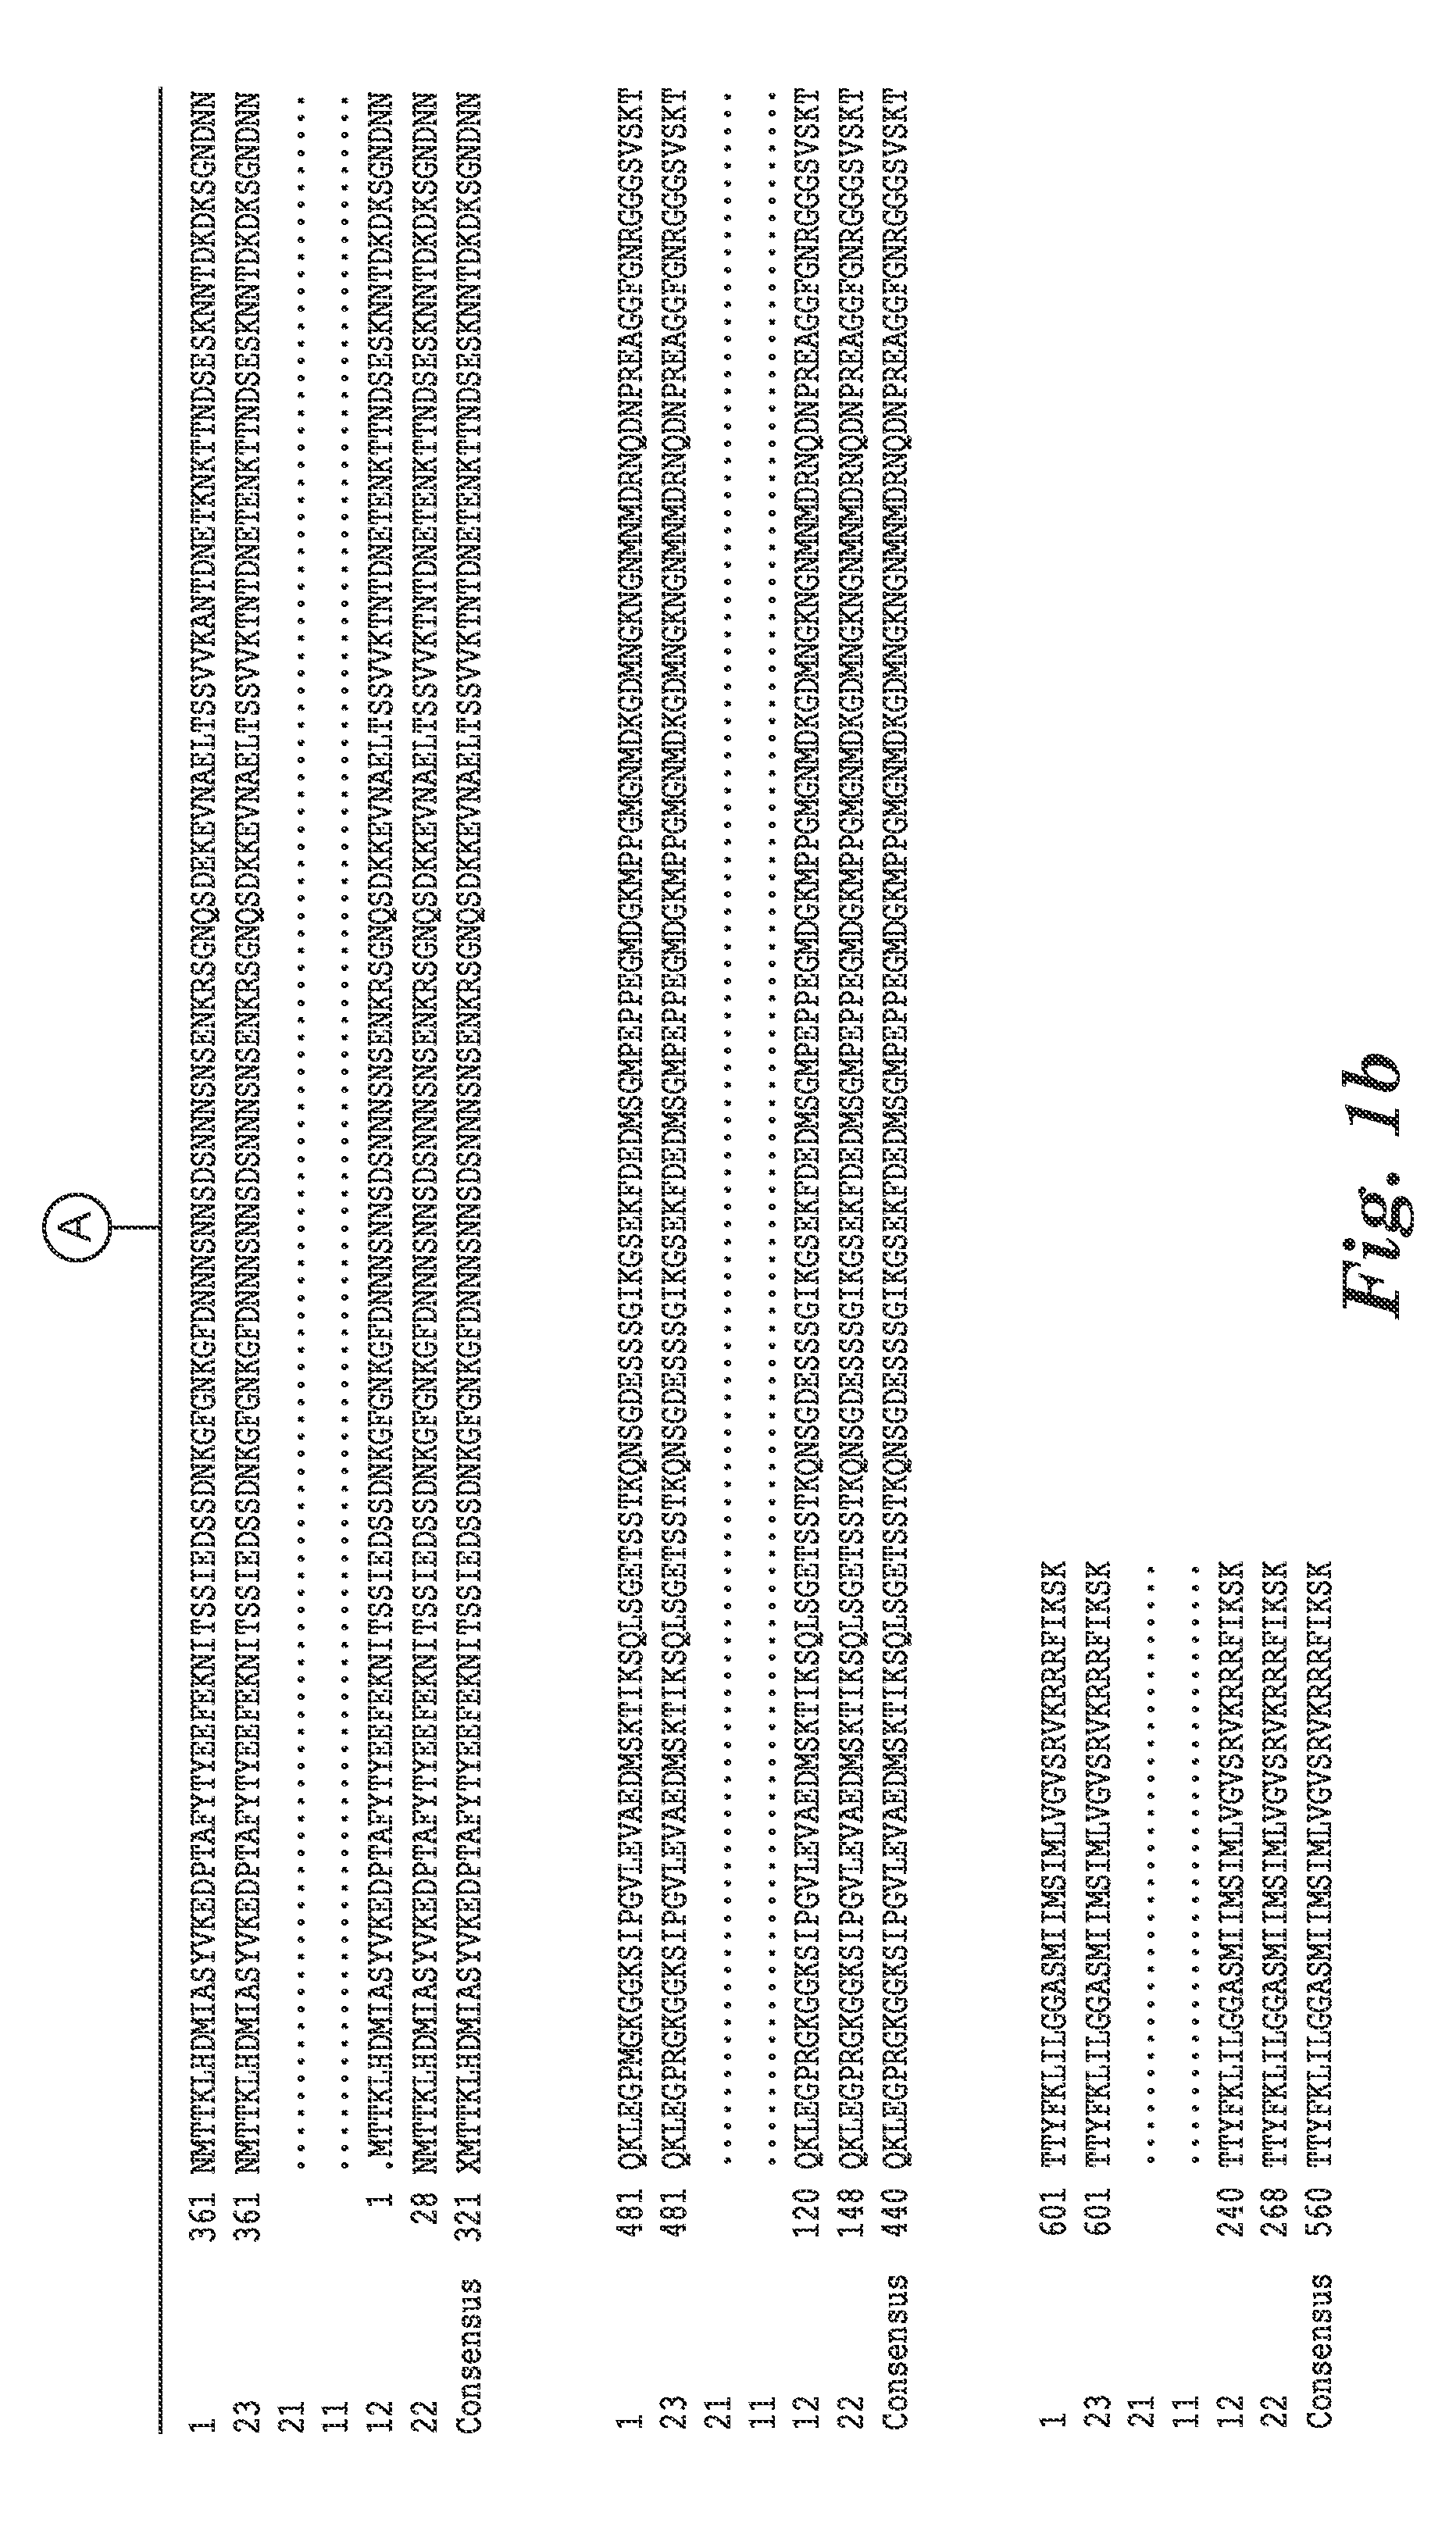 Antibodies to clostridium difficile spores and uses thereof